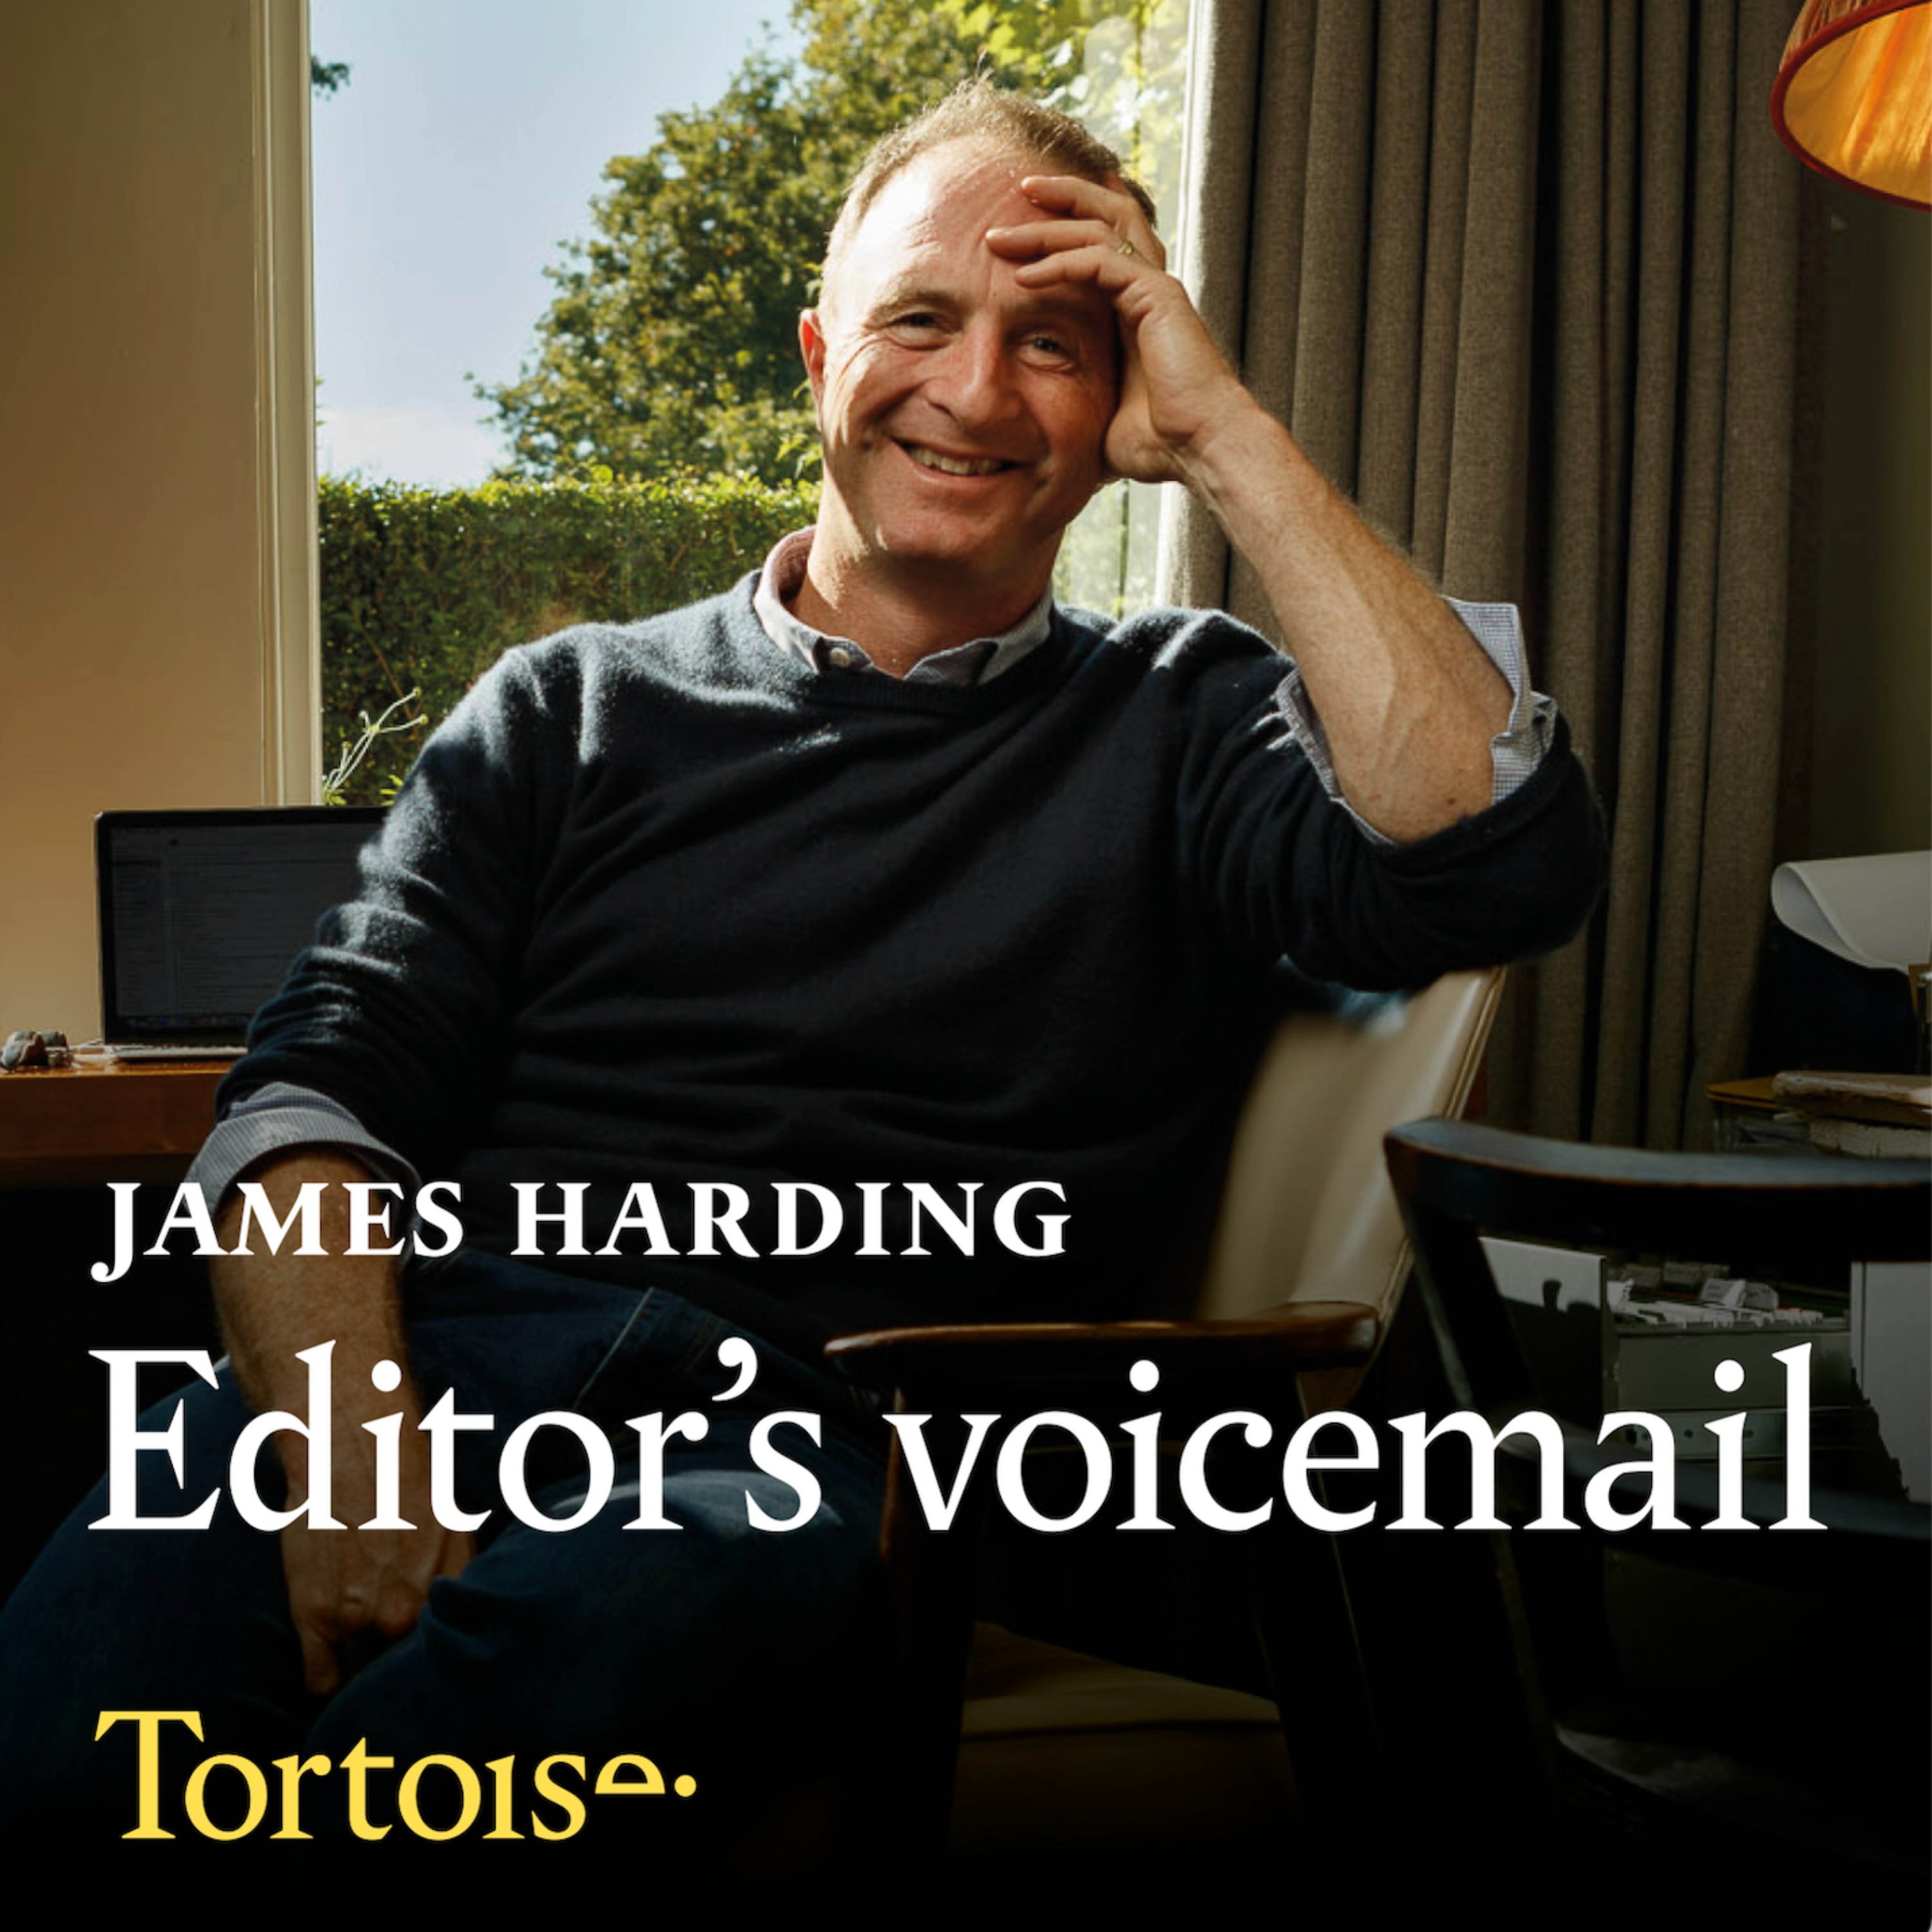 Editor's Voicemail: The joy of journalism